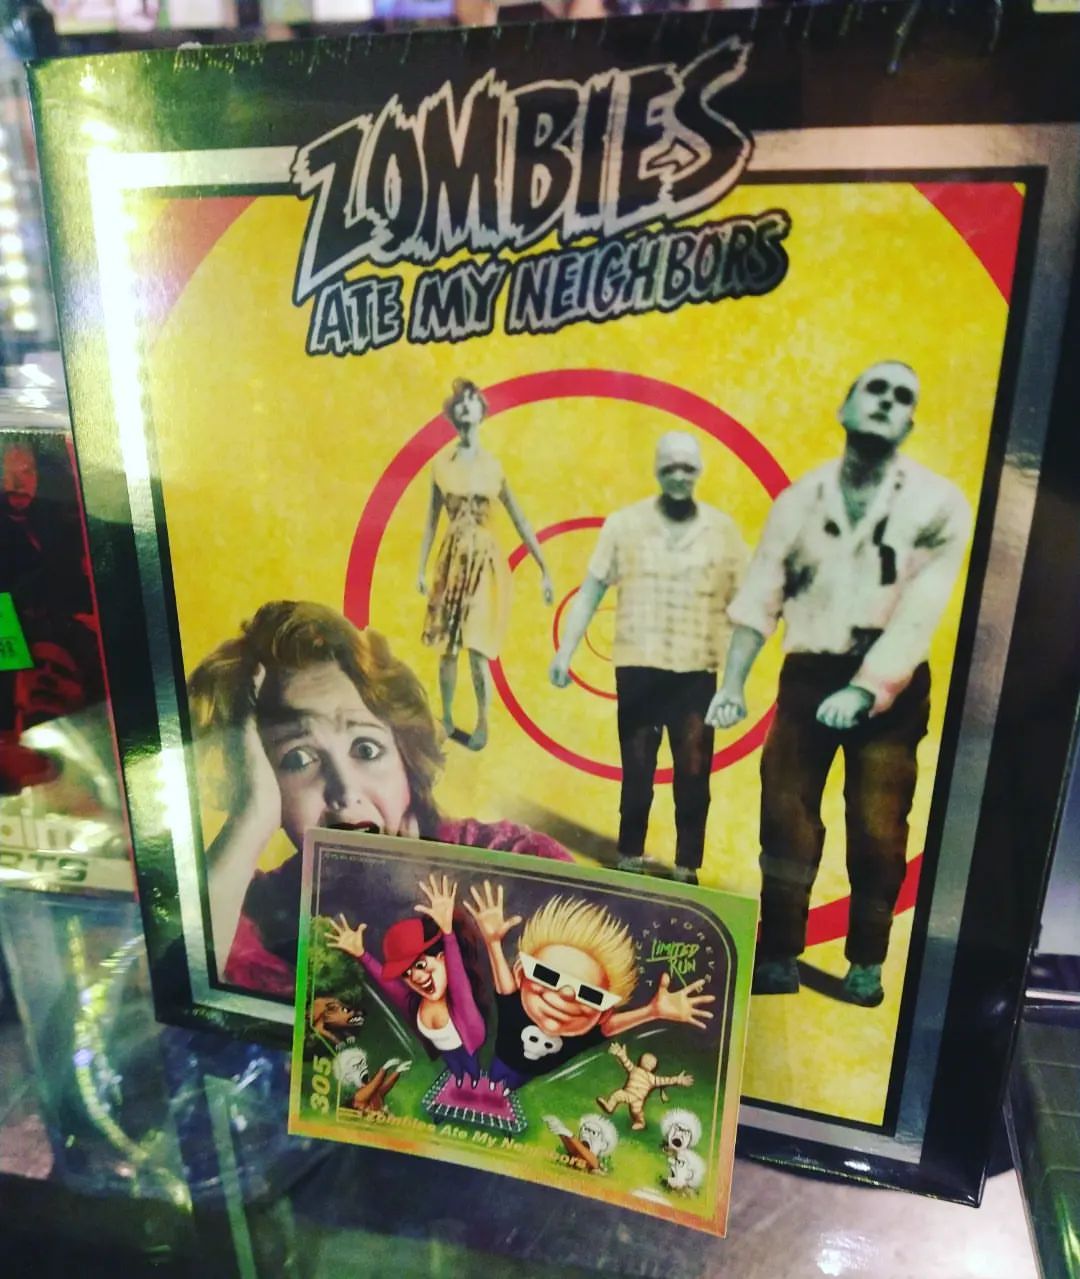 We now have the limited run translucent green Zombies Ate My Neighbors Super Nintendo collector’s edition! If you would rather have your zombie action on a Nintendo switch or PlayStation 4 we have copies of those available as well!

#hudsonsvideogames #hudsonsvideogamesaltamonte #limitedrun #snes #supernintendo #nintendo #switch #nintendoswitch #playstation4 #ps4 #zombiesatemyneighbors #collectorsedition #retrogames #videogames #apopka #altamontesprings #winterpark #sanford #lakemary #oviedo #orlando #wintersprings #longwood #casselberry  (at Altamonte Mall)
https://www.instagram.com/p/CpqSftlP7q-/?igshid=NGJjMDIxMWI=